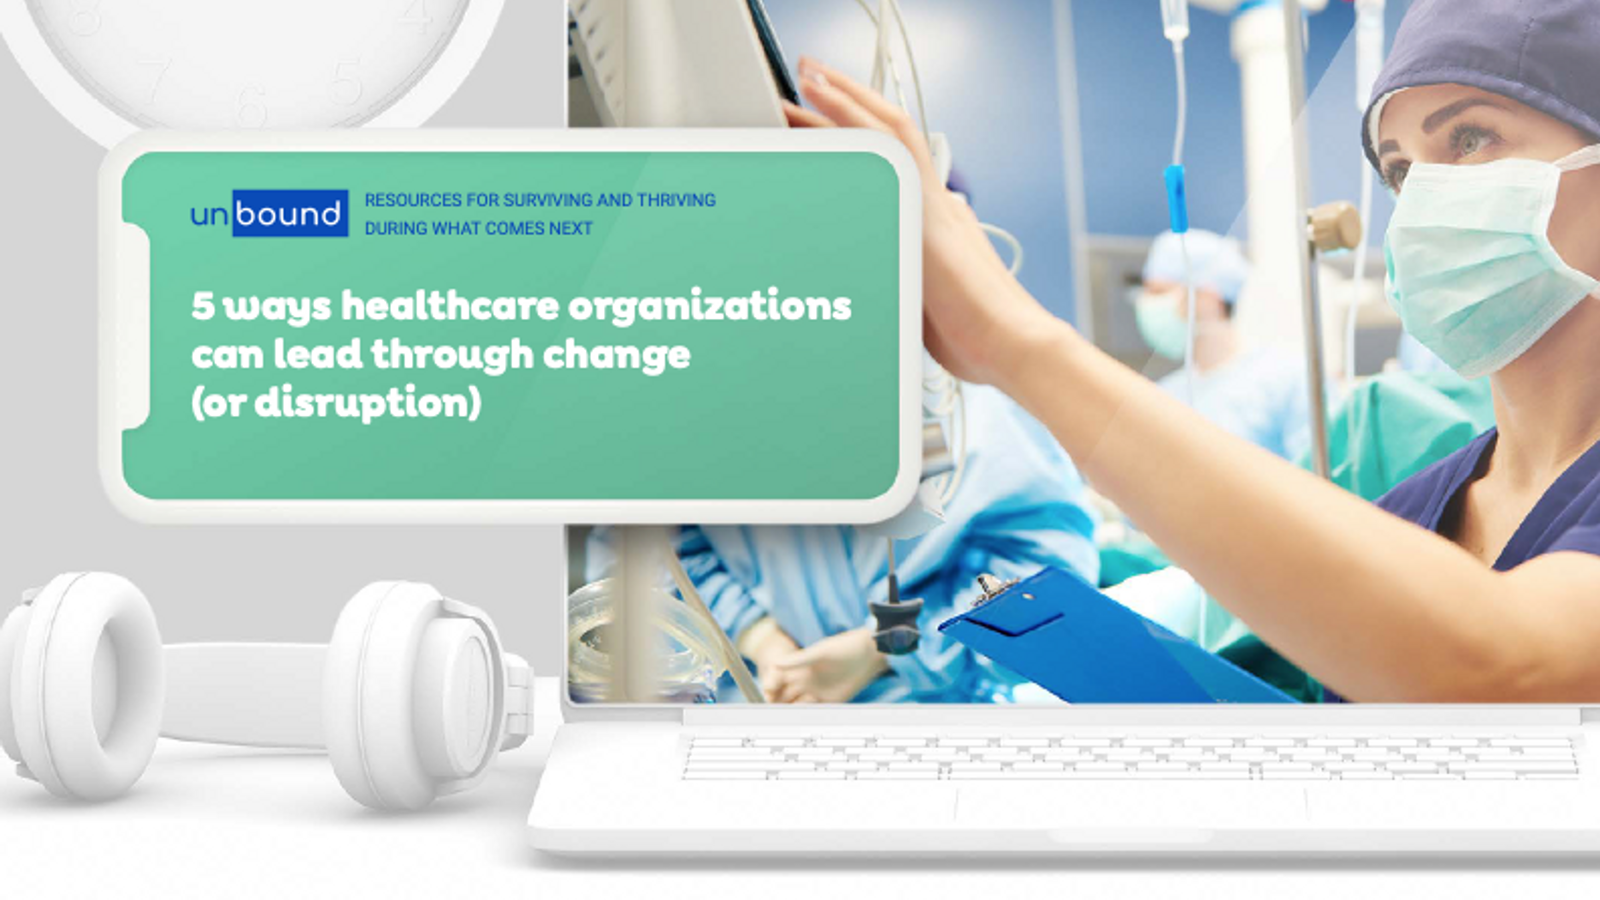 5 Ways healthcare organizations can lead through change